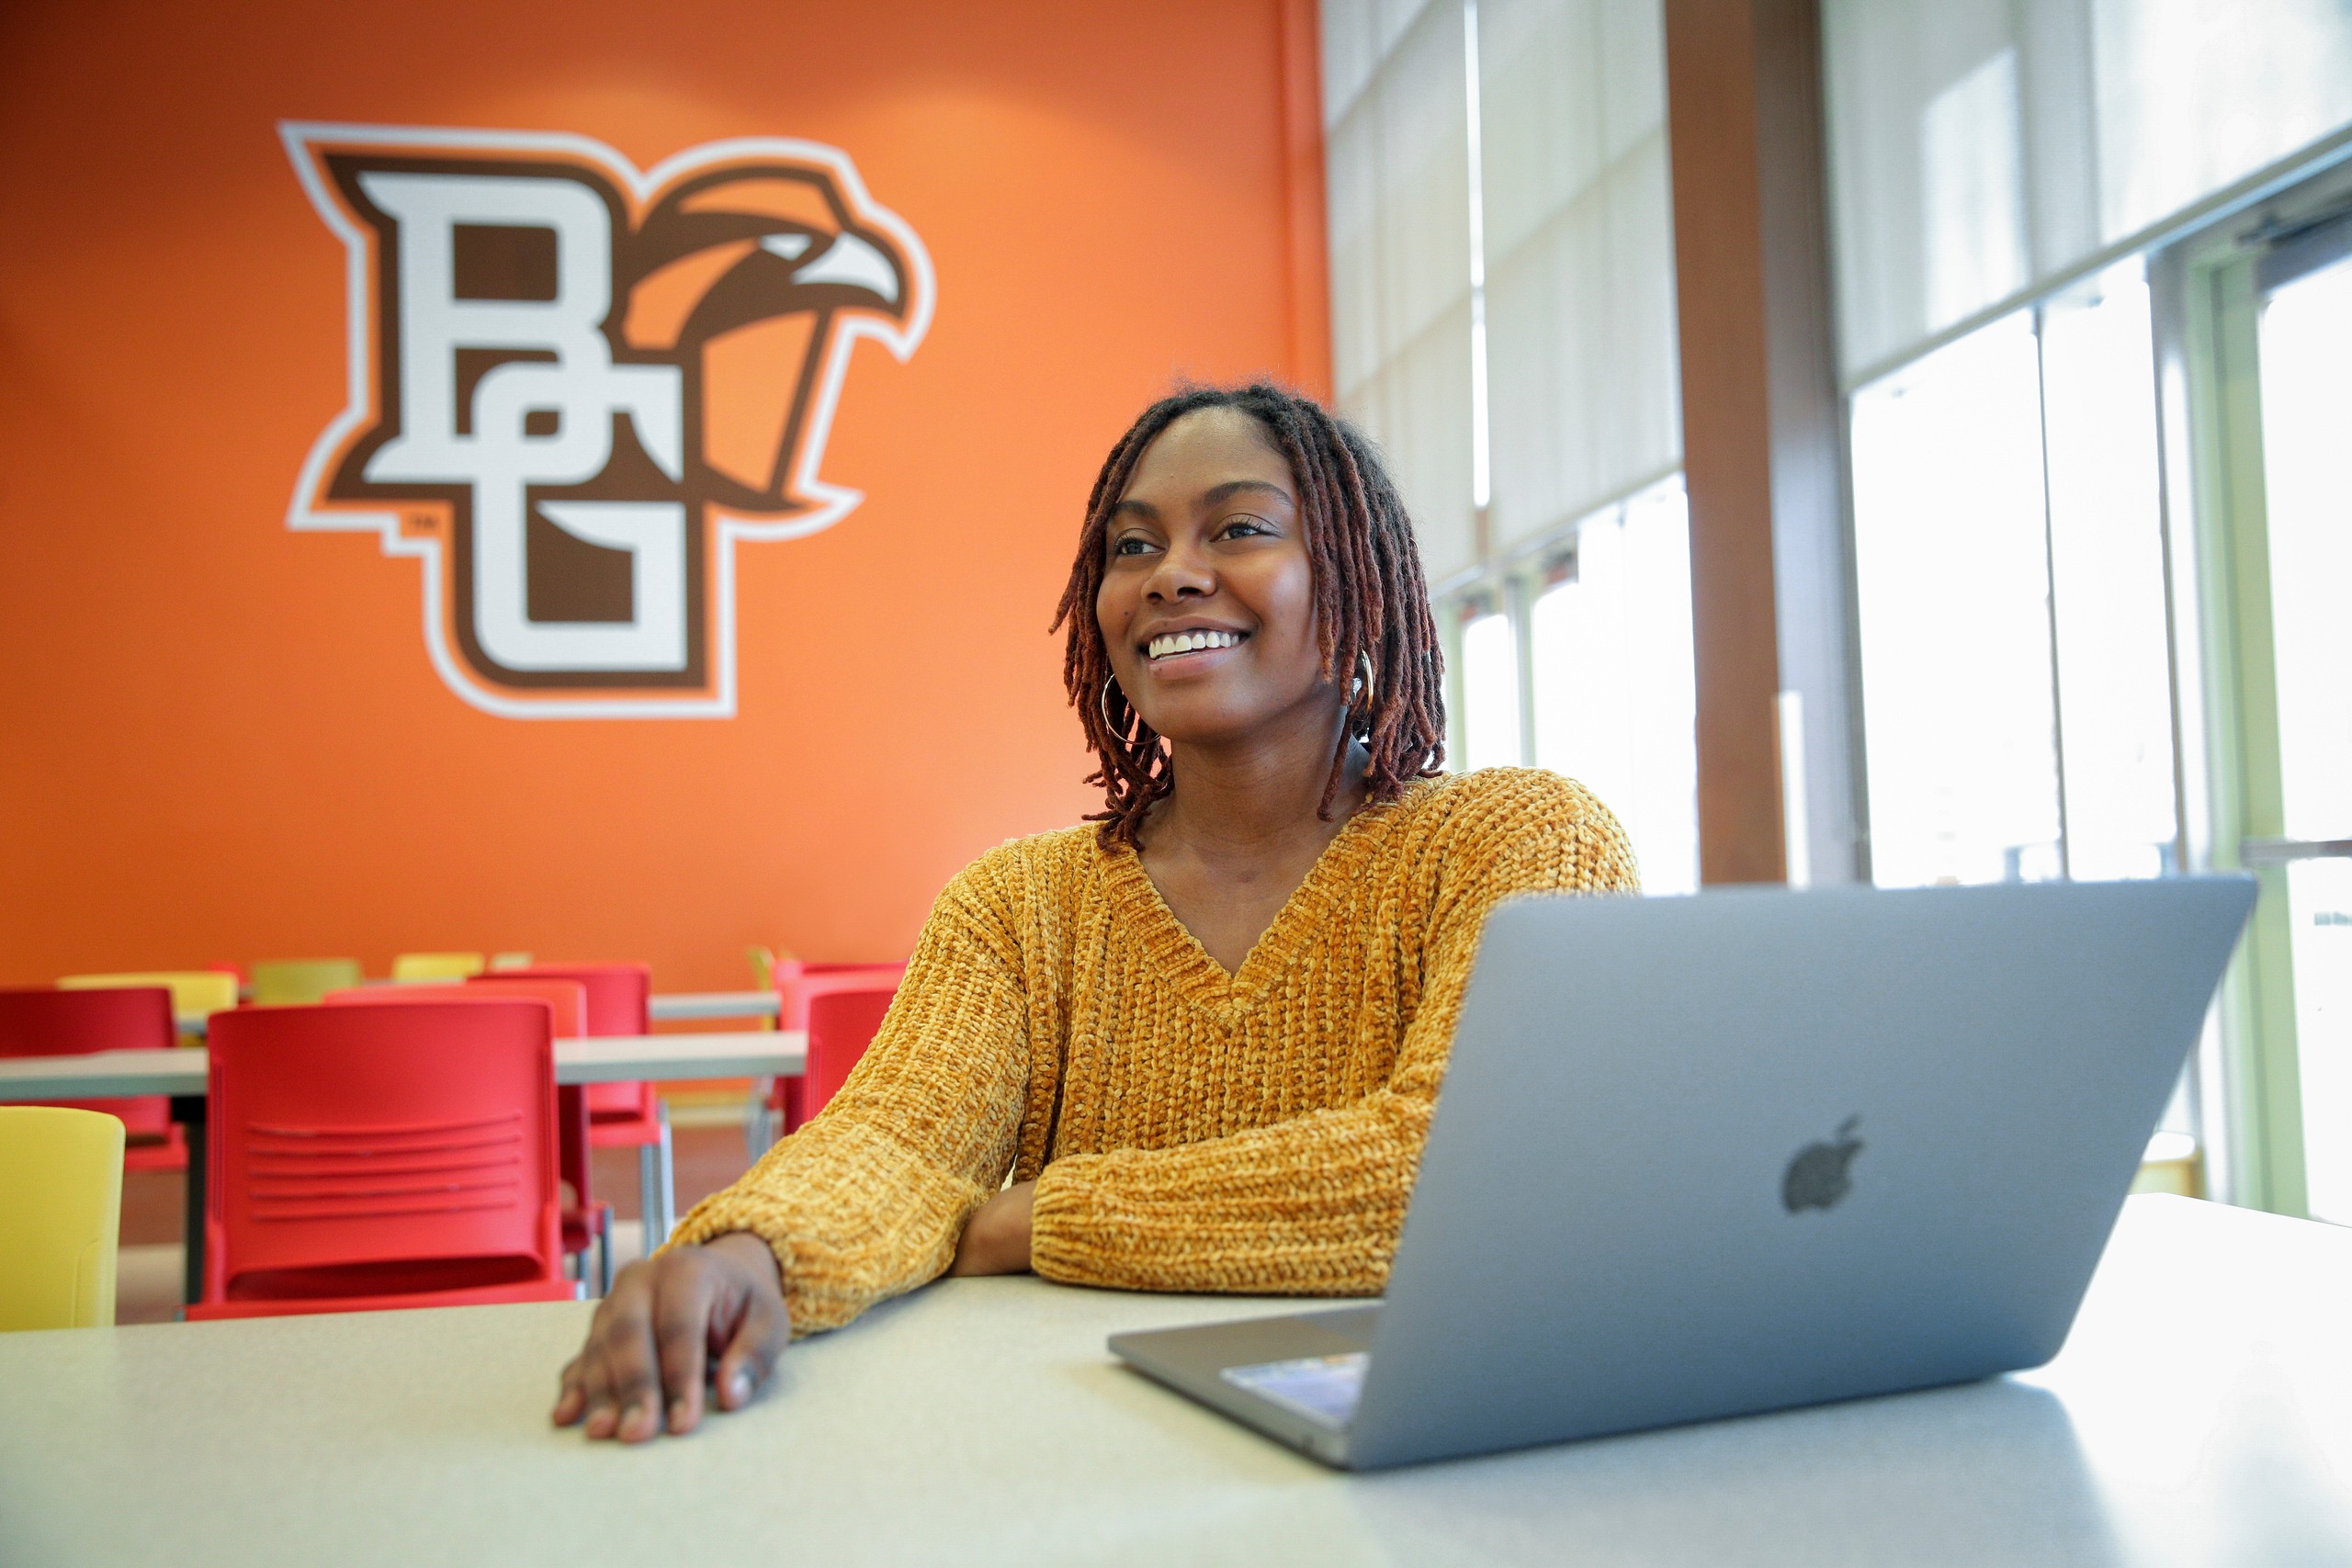 BGSU student smiling with her laptop